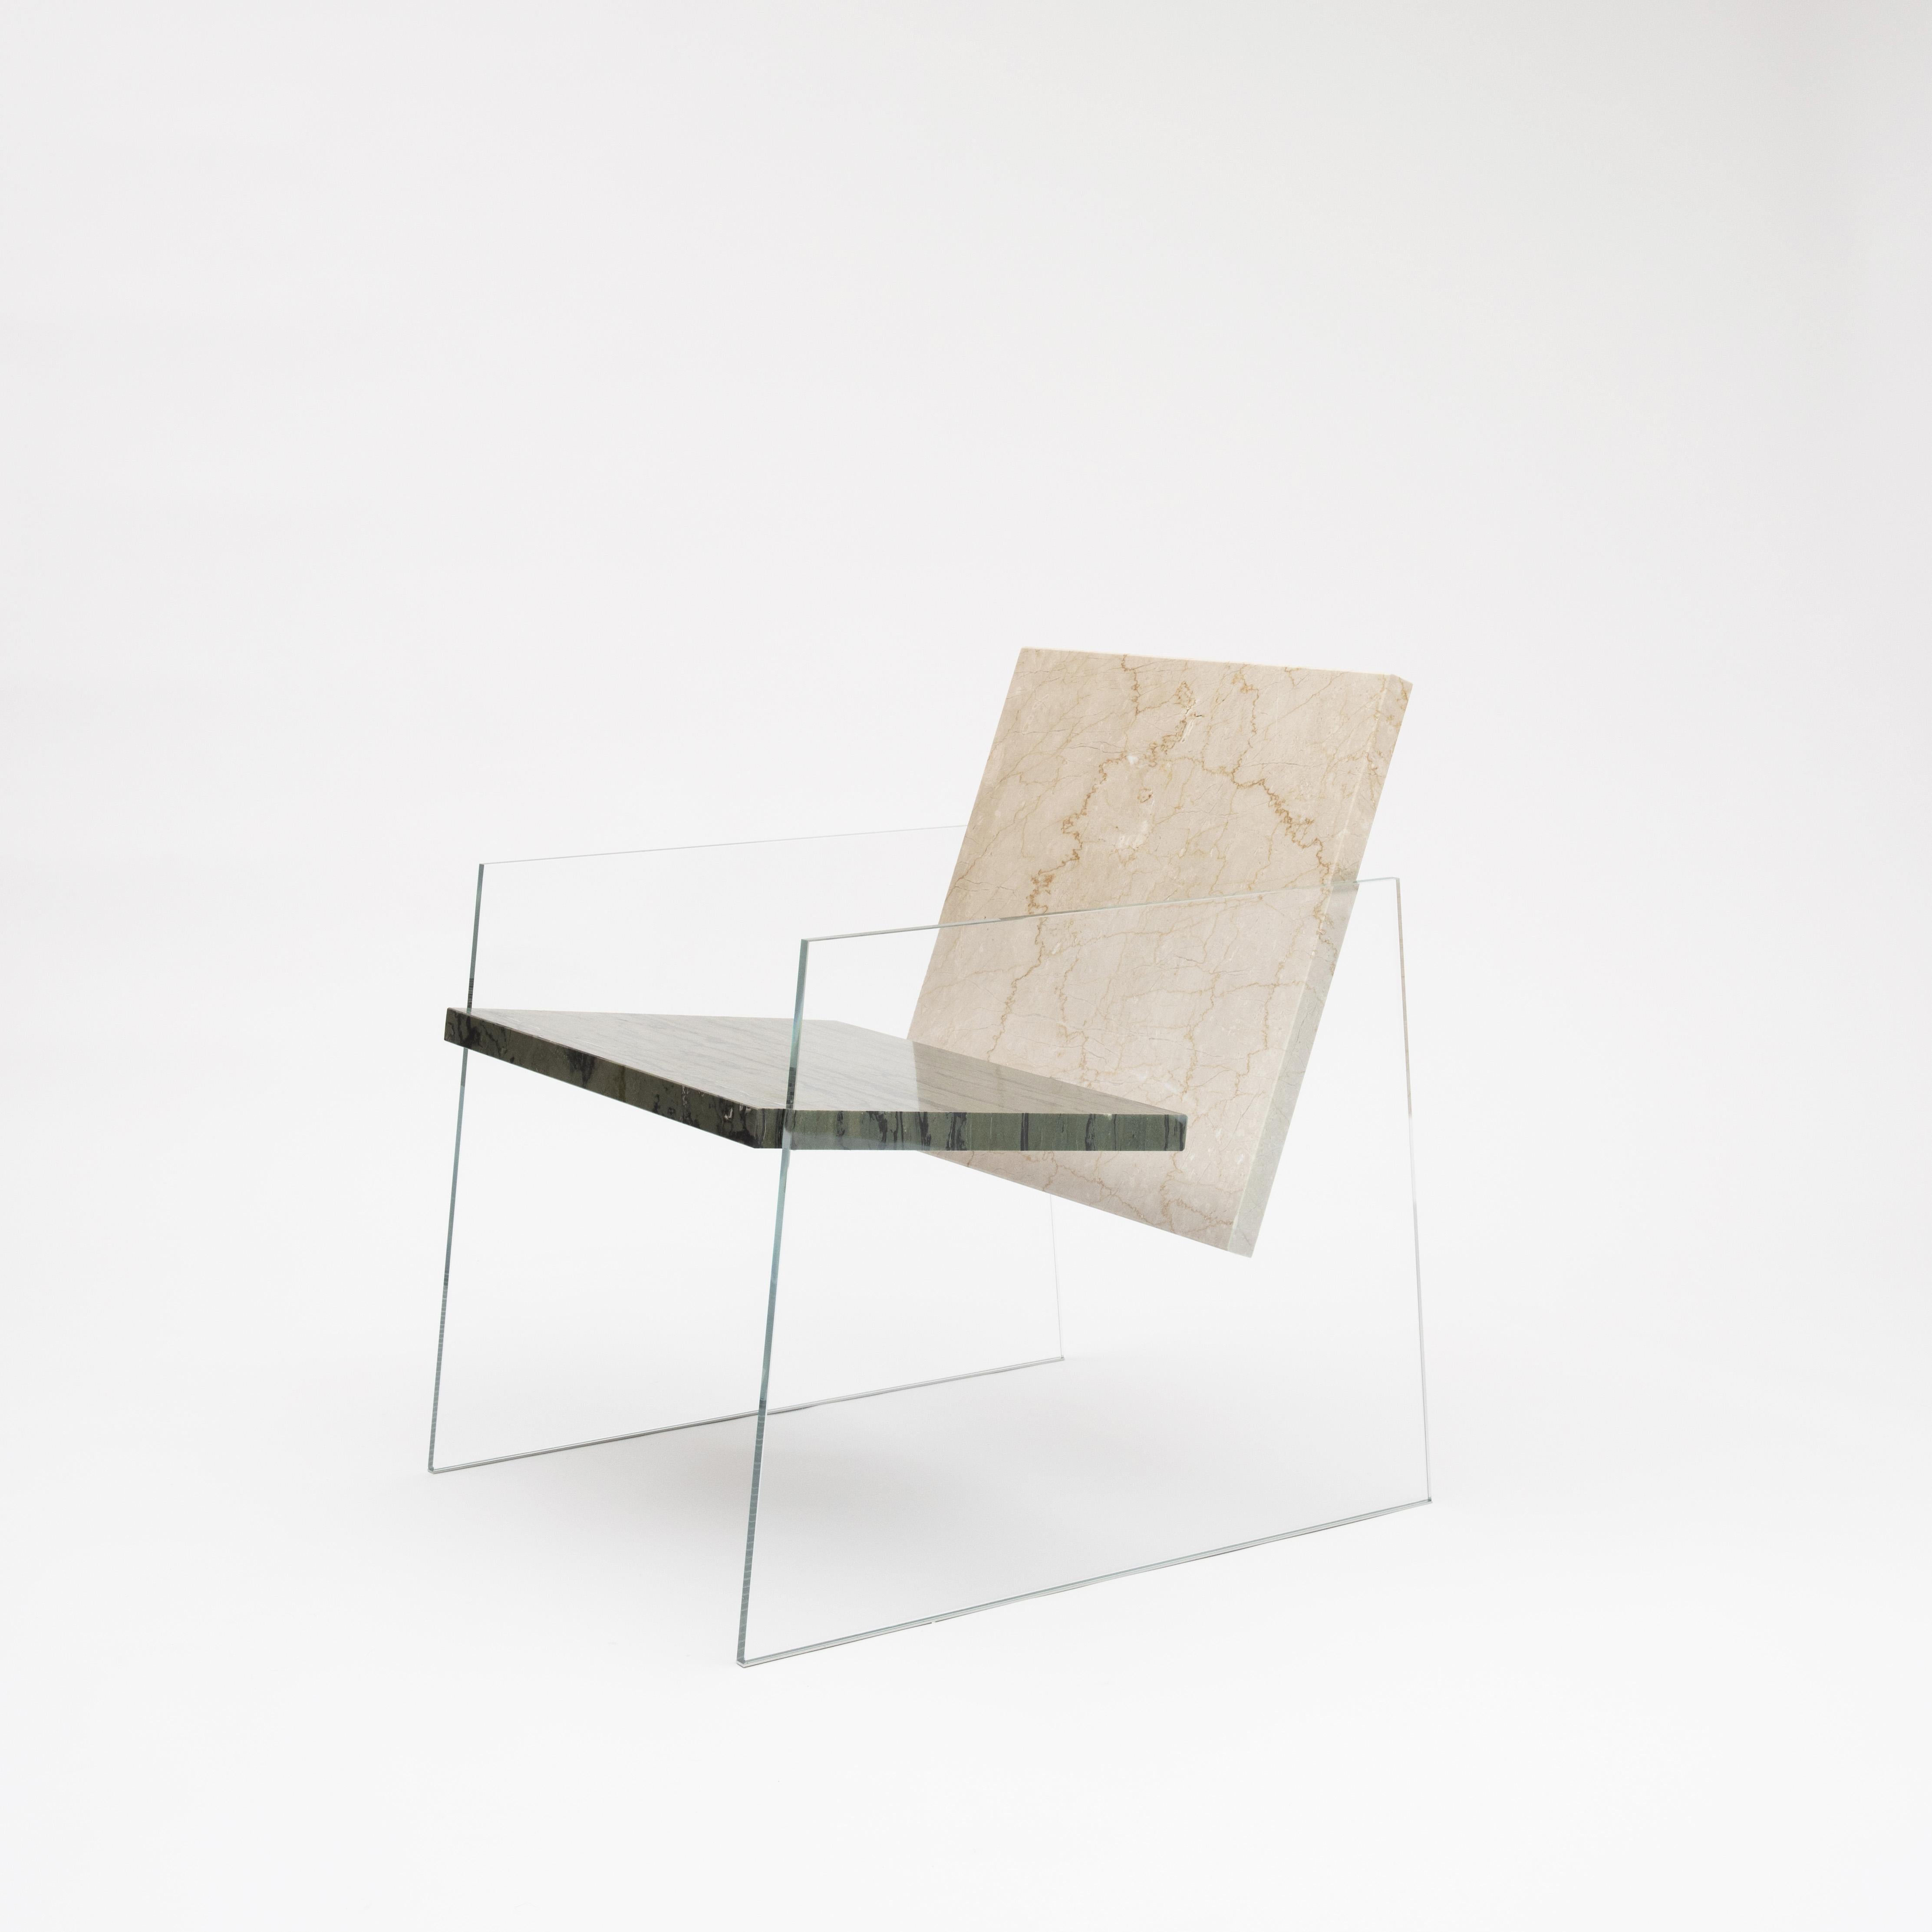 Delta A armchair by Frederic Saulou
Limited Edition of 4
Materials: White glass, inox, green Bambou marble from Brésil, Beige Botticino marble from Italy.
Dimensions: D 57 x W 70.5 x H 73.6 cm
Signed and numbered.

